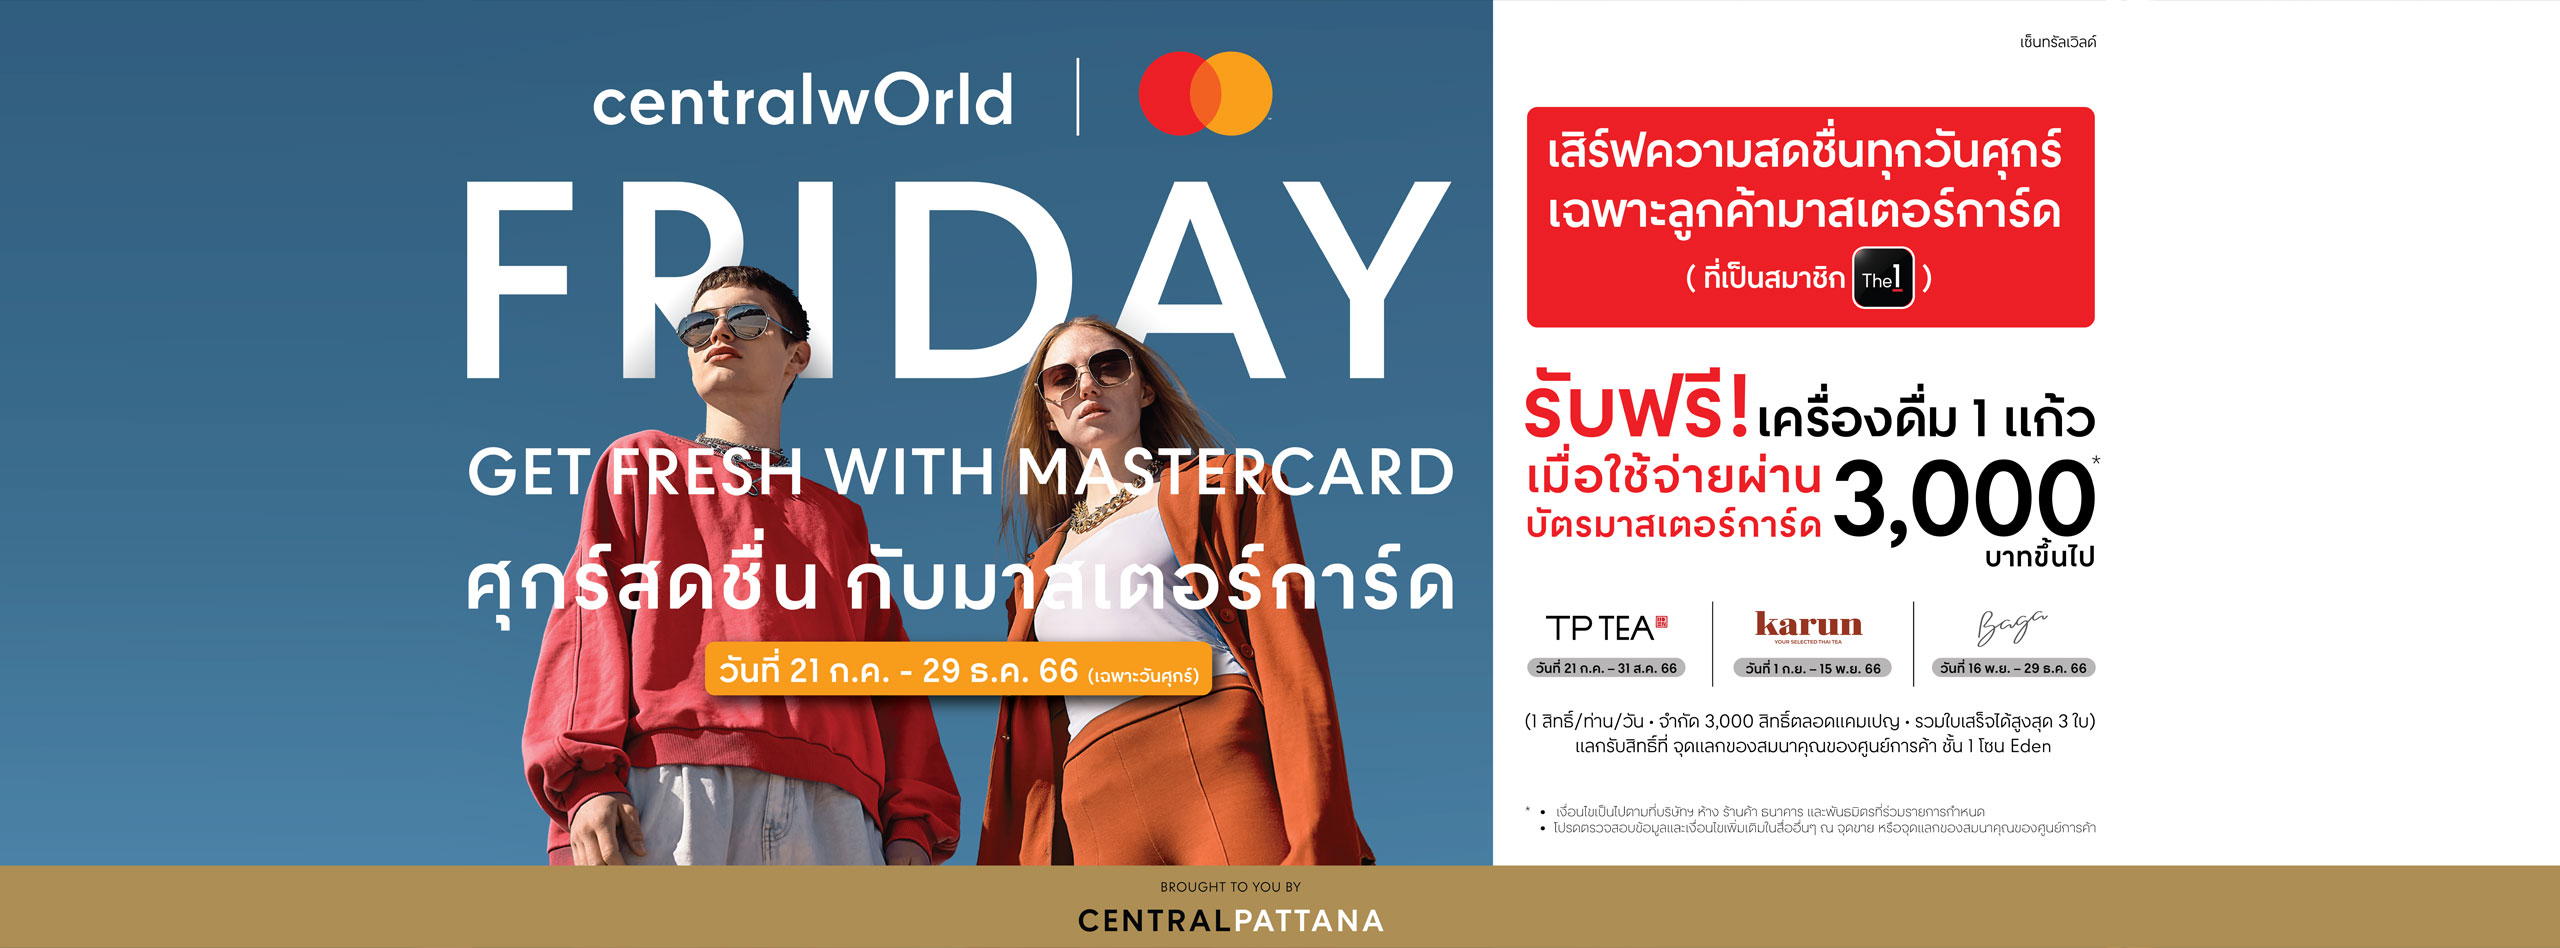 Friday Get Fresh with Mastercard